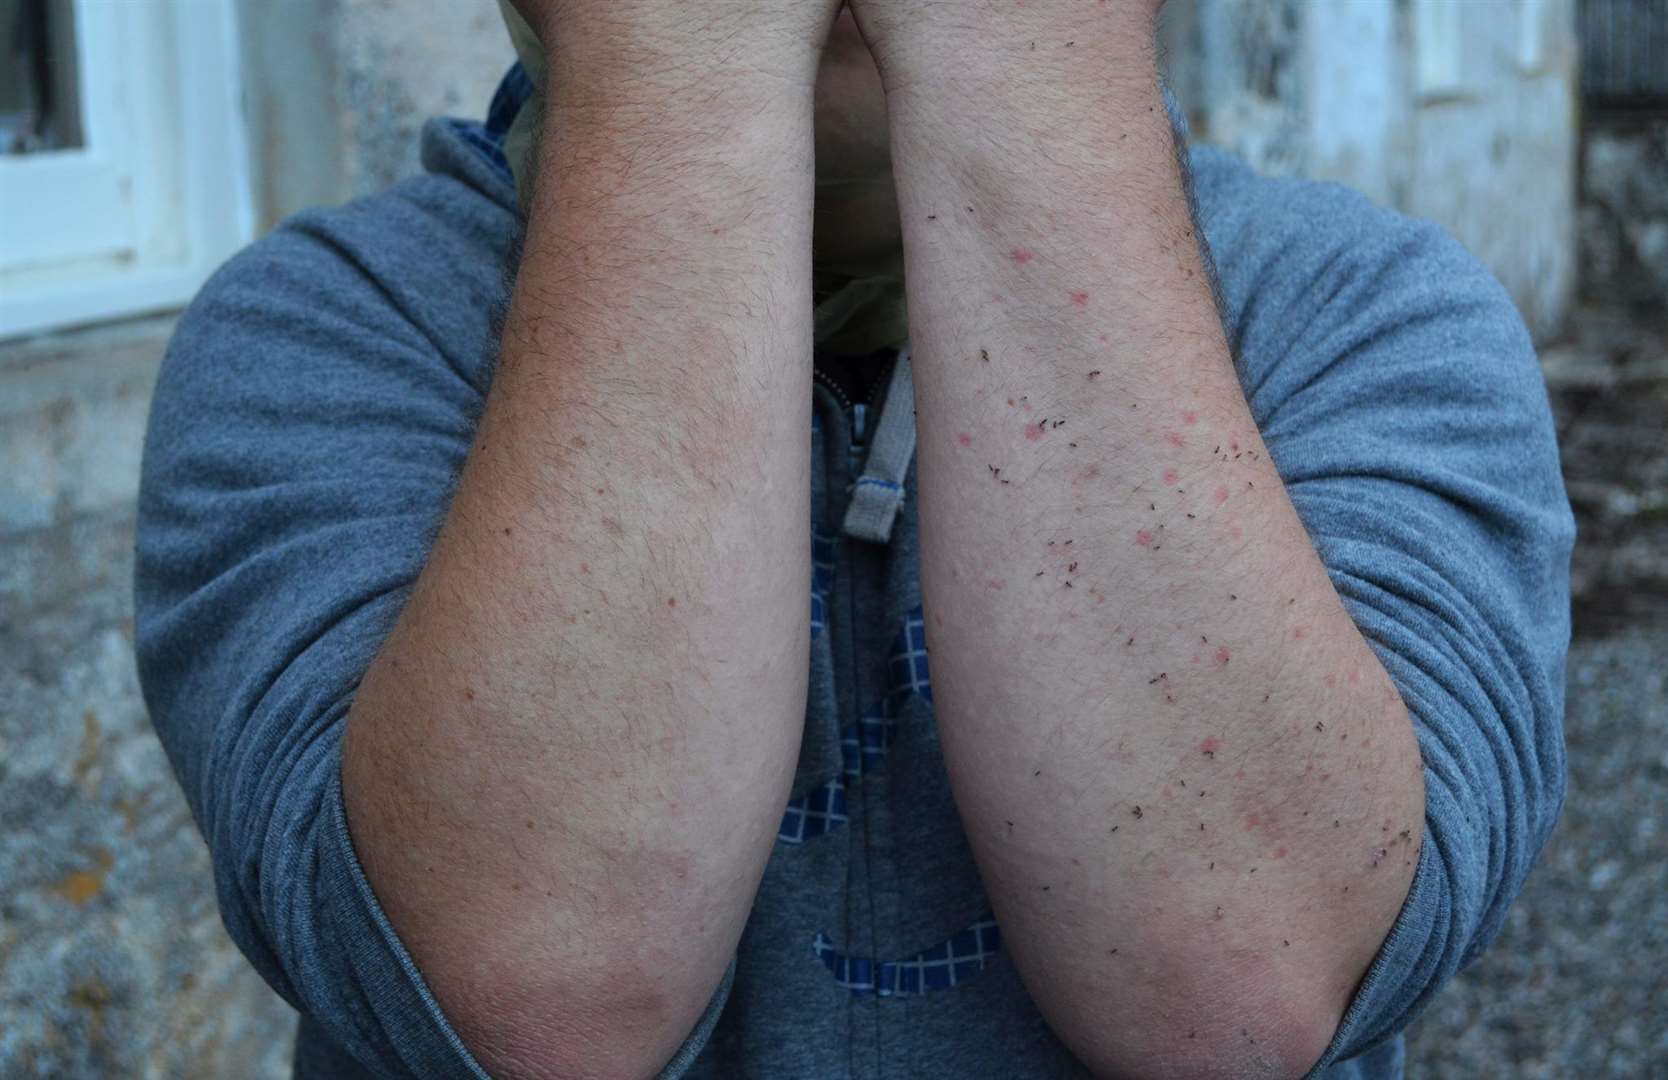 Insect bites can be a serious problem for some people.